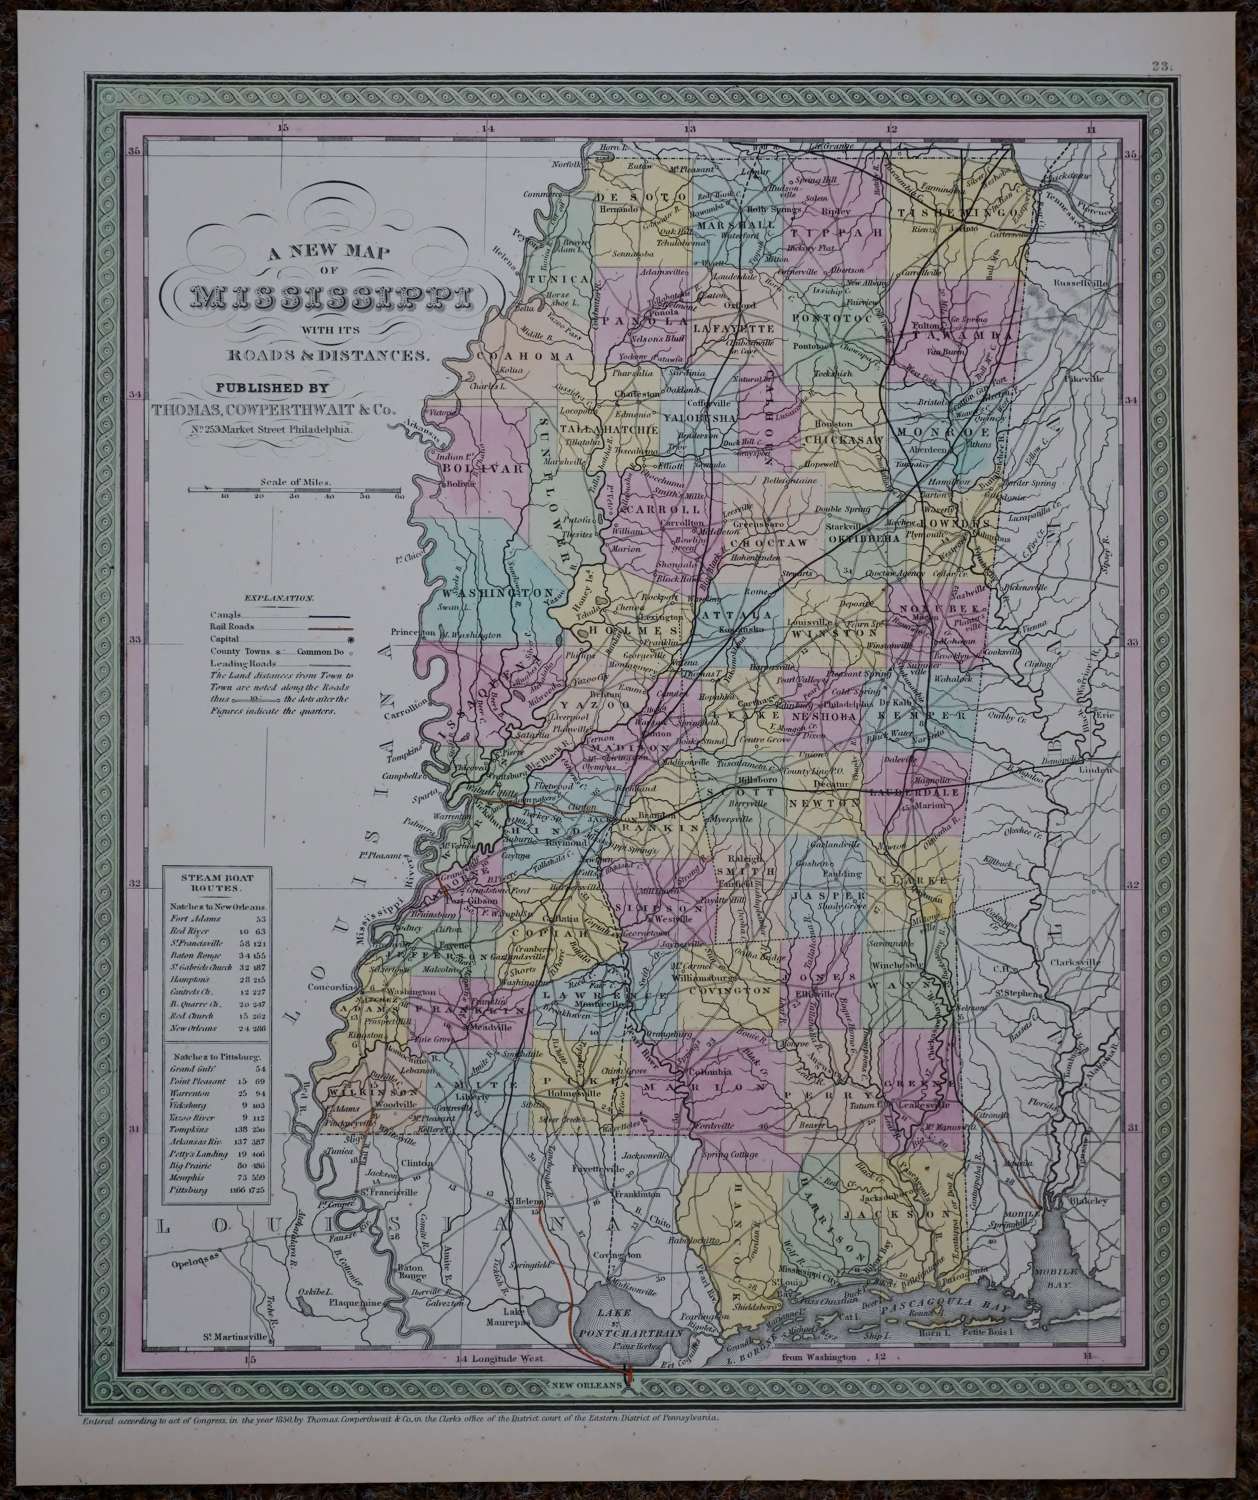 A New Map of Mississippi with its Roads & .. by Thomas Cowperthwaith